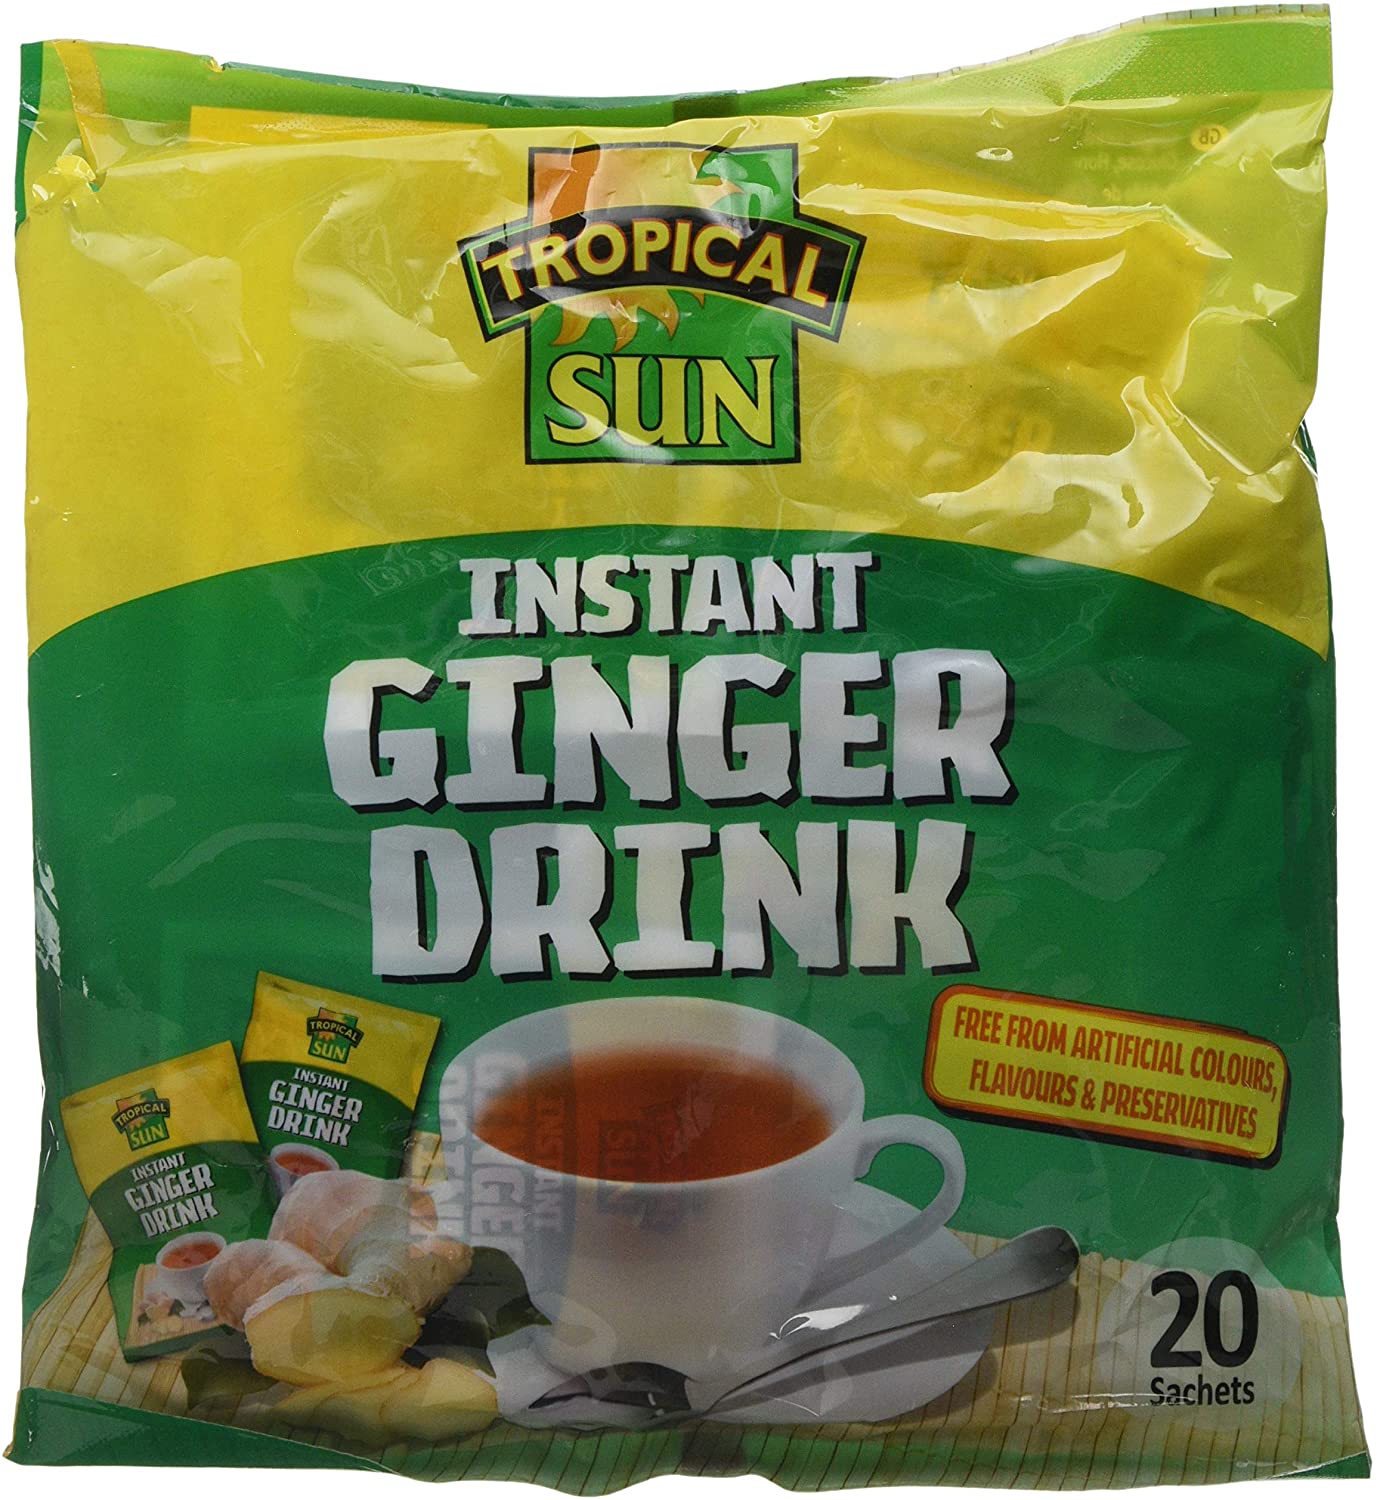 Tropical Sun Instant Ginger Drink